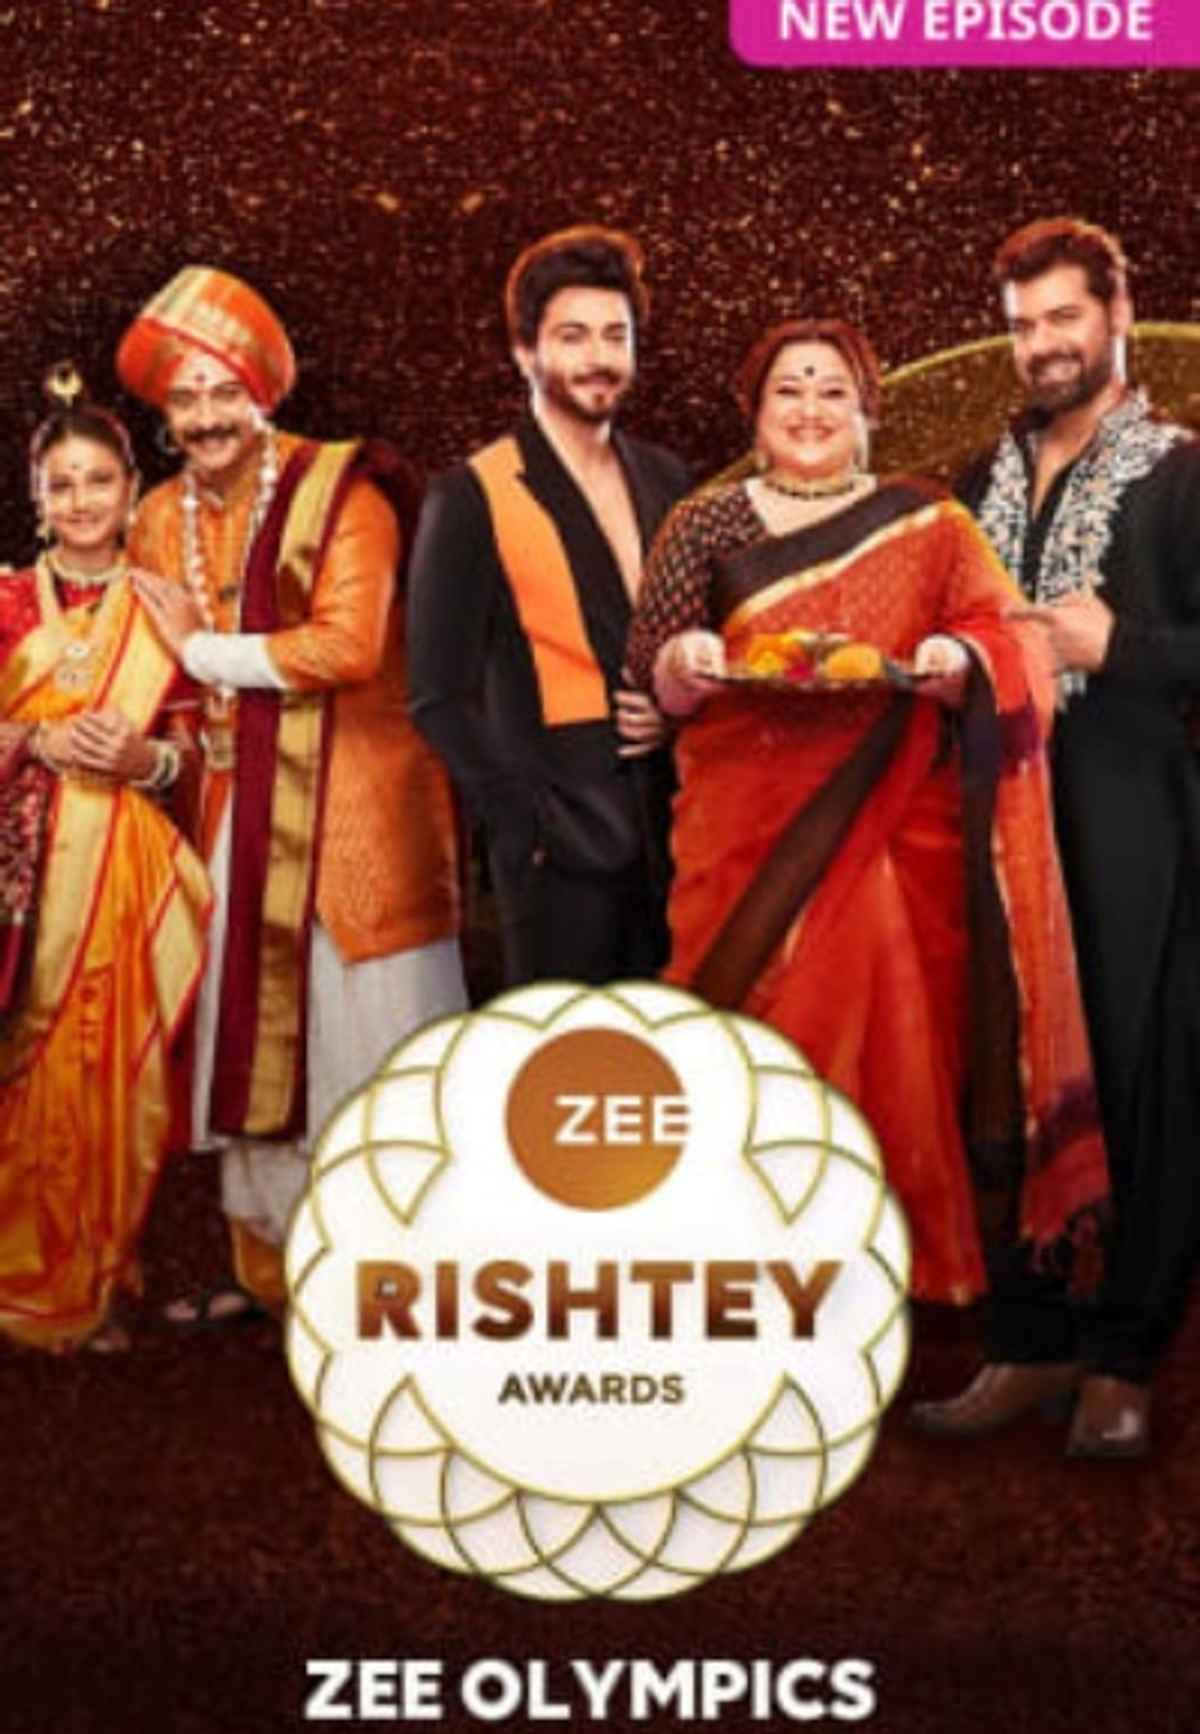 Watch Zee Rishtey Awards 2021 Online, All Seasons or Episodes, Other